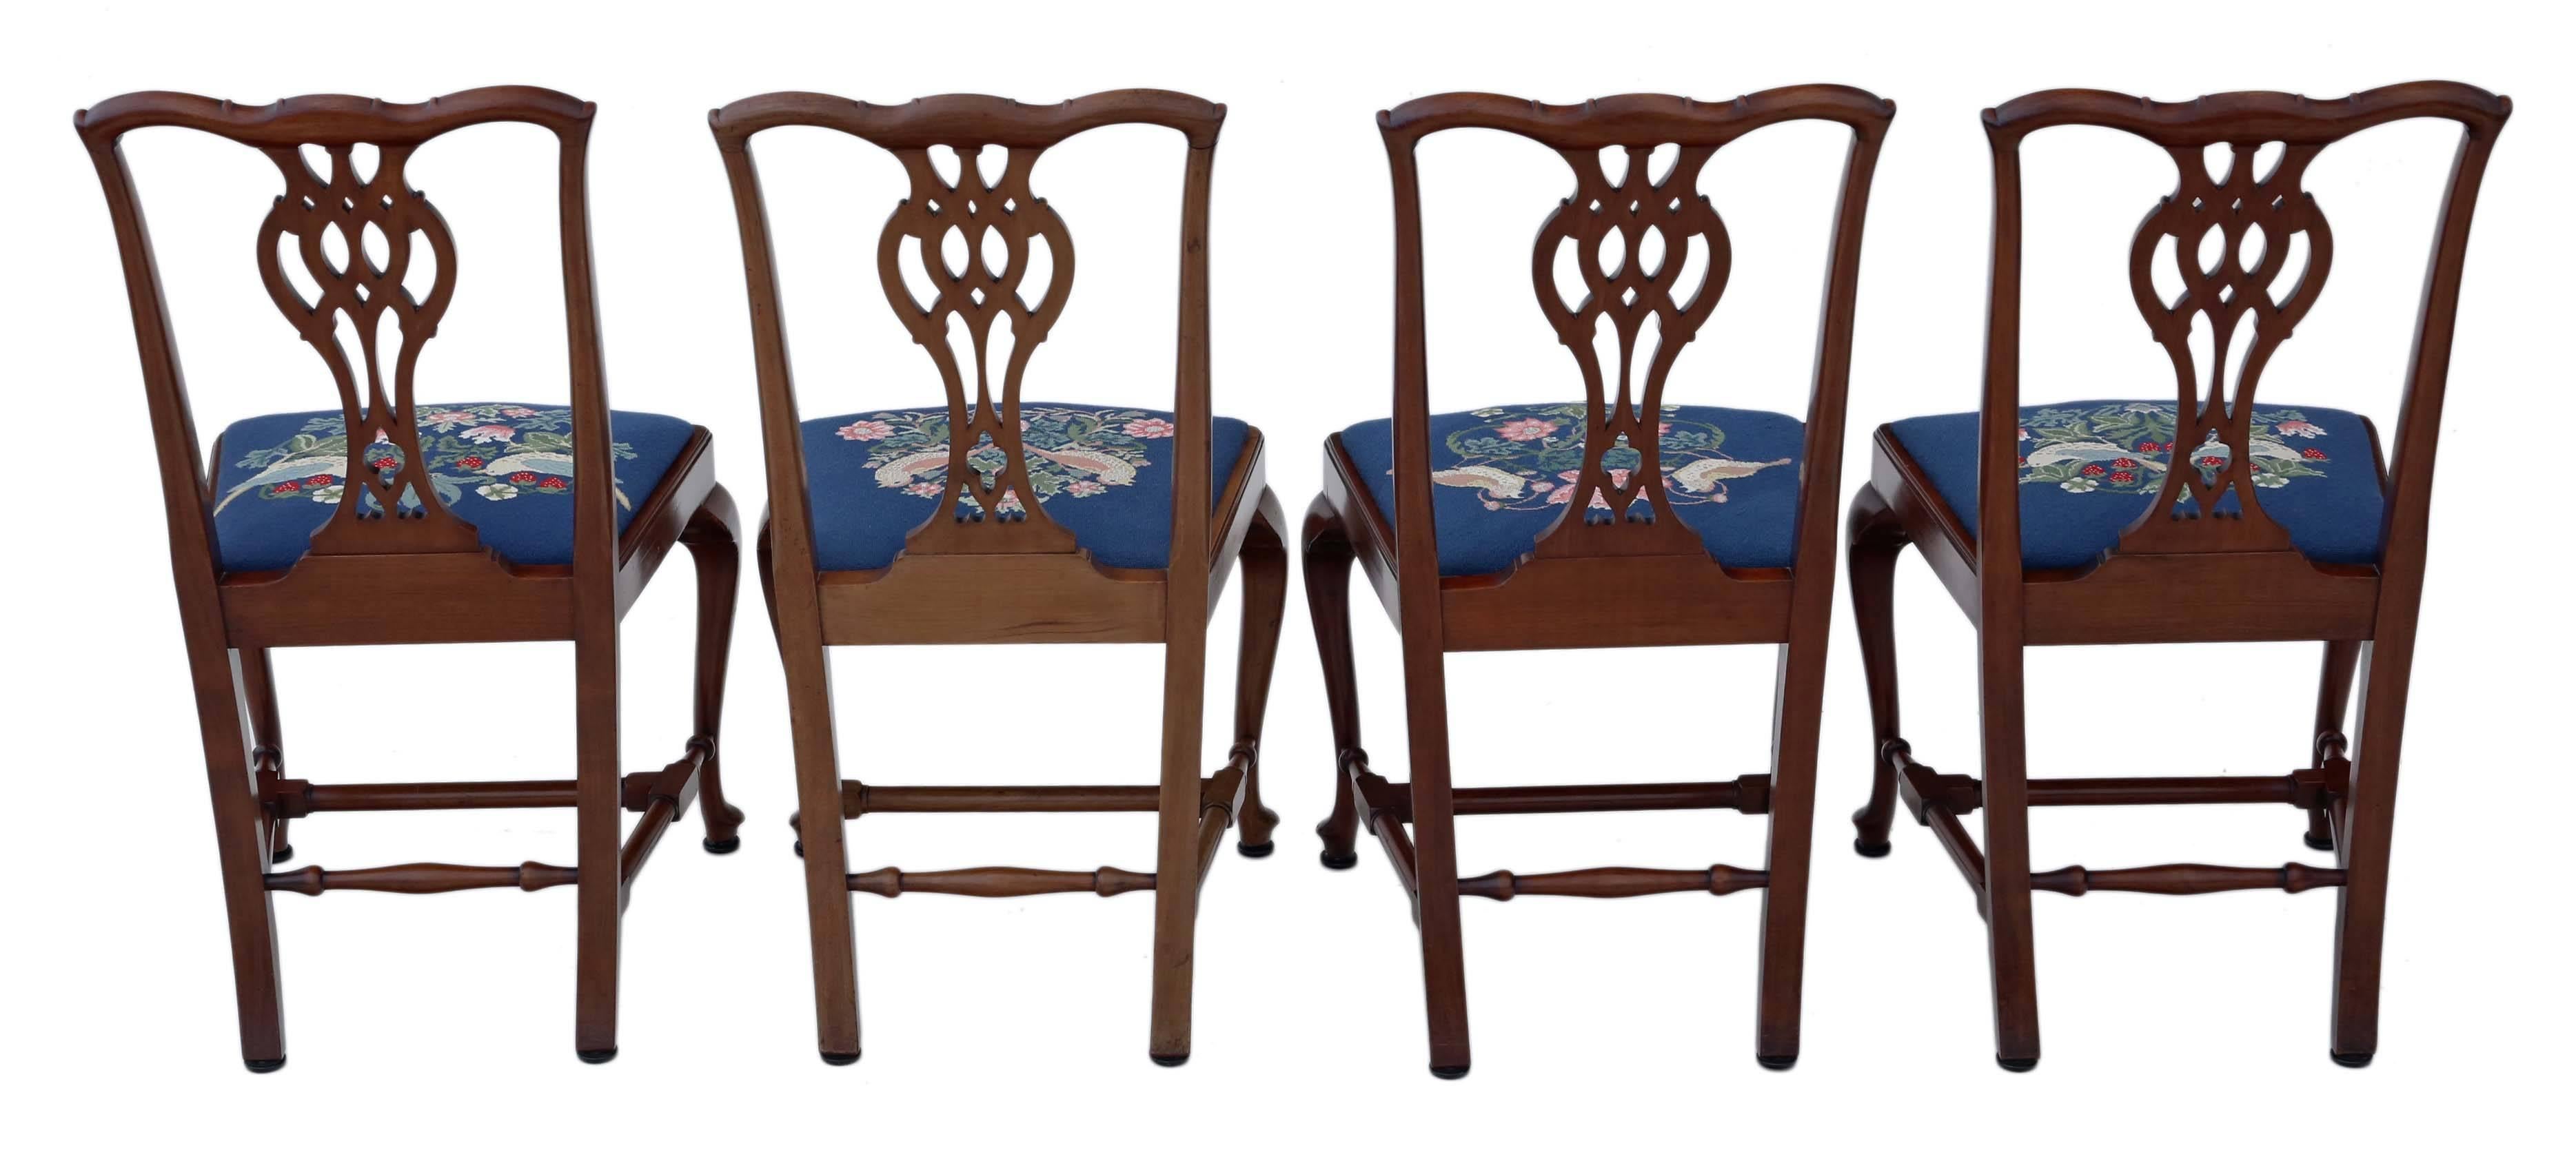 Antique fine quality set of four mahogany Chippendale revival dining chairs.

Date from the mid-20th century and are of the highest quality (very expensive when purchased new)

Solid and strong with no loose joints. Great styling and detailed